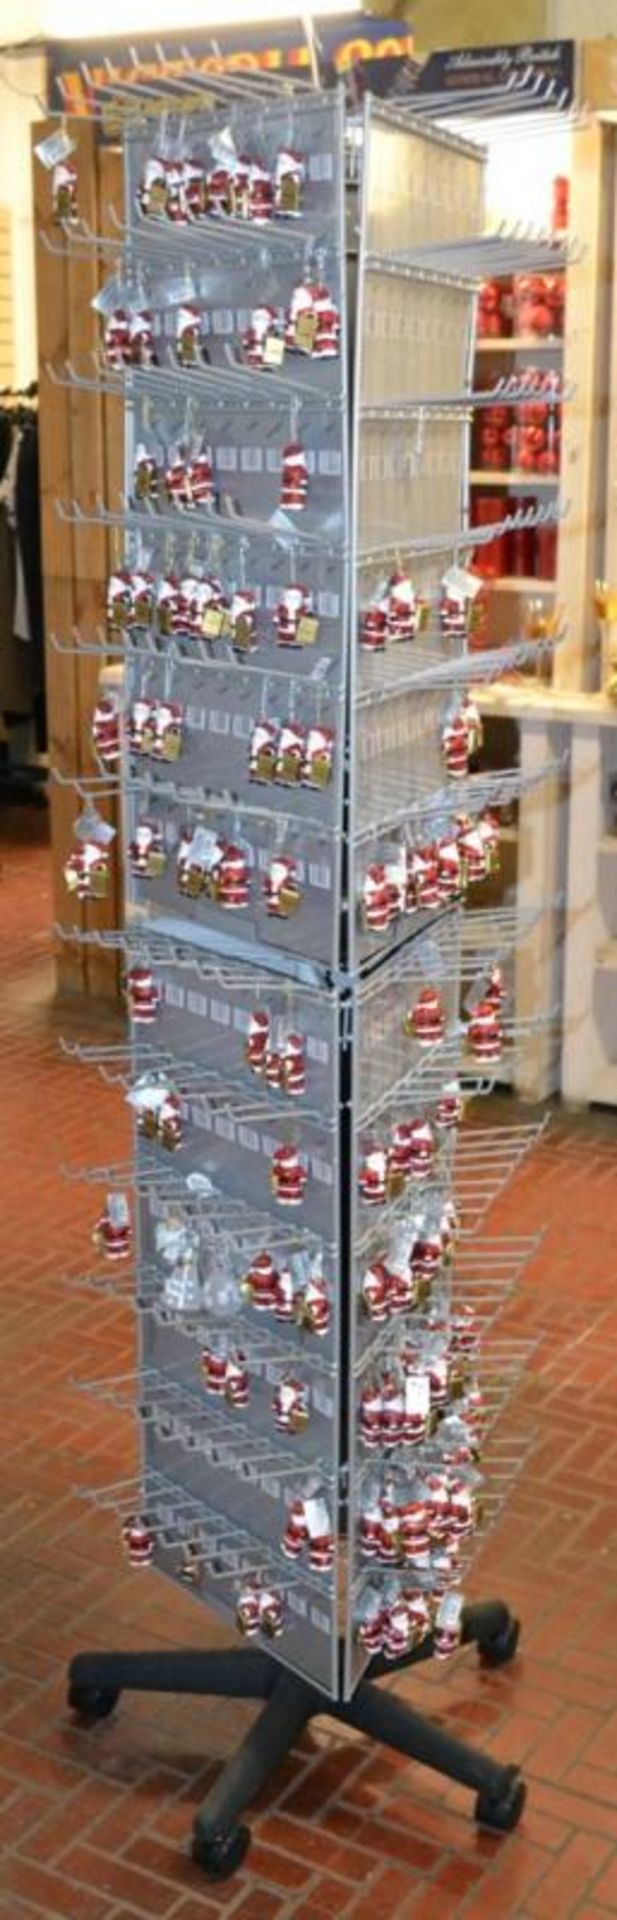 1 x Retail Carousel Display Stand With Approx 200 x Personalised Father Christmas Decorations - Ref